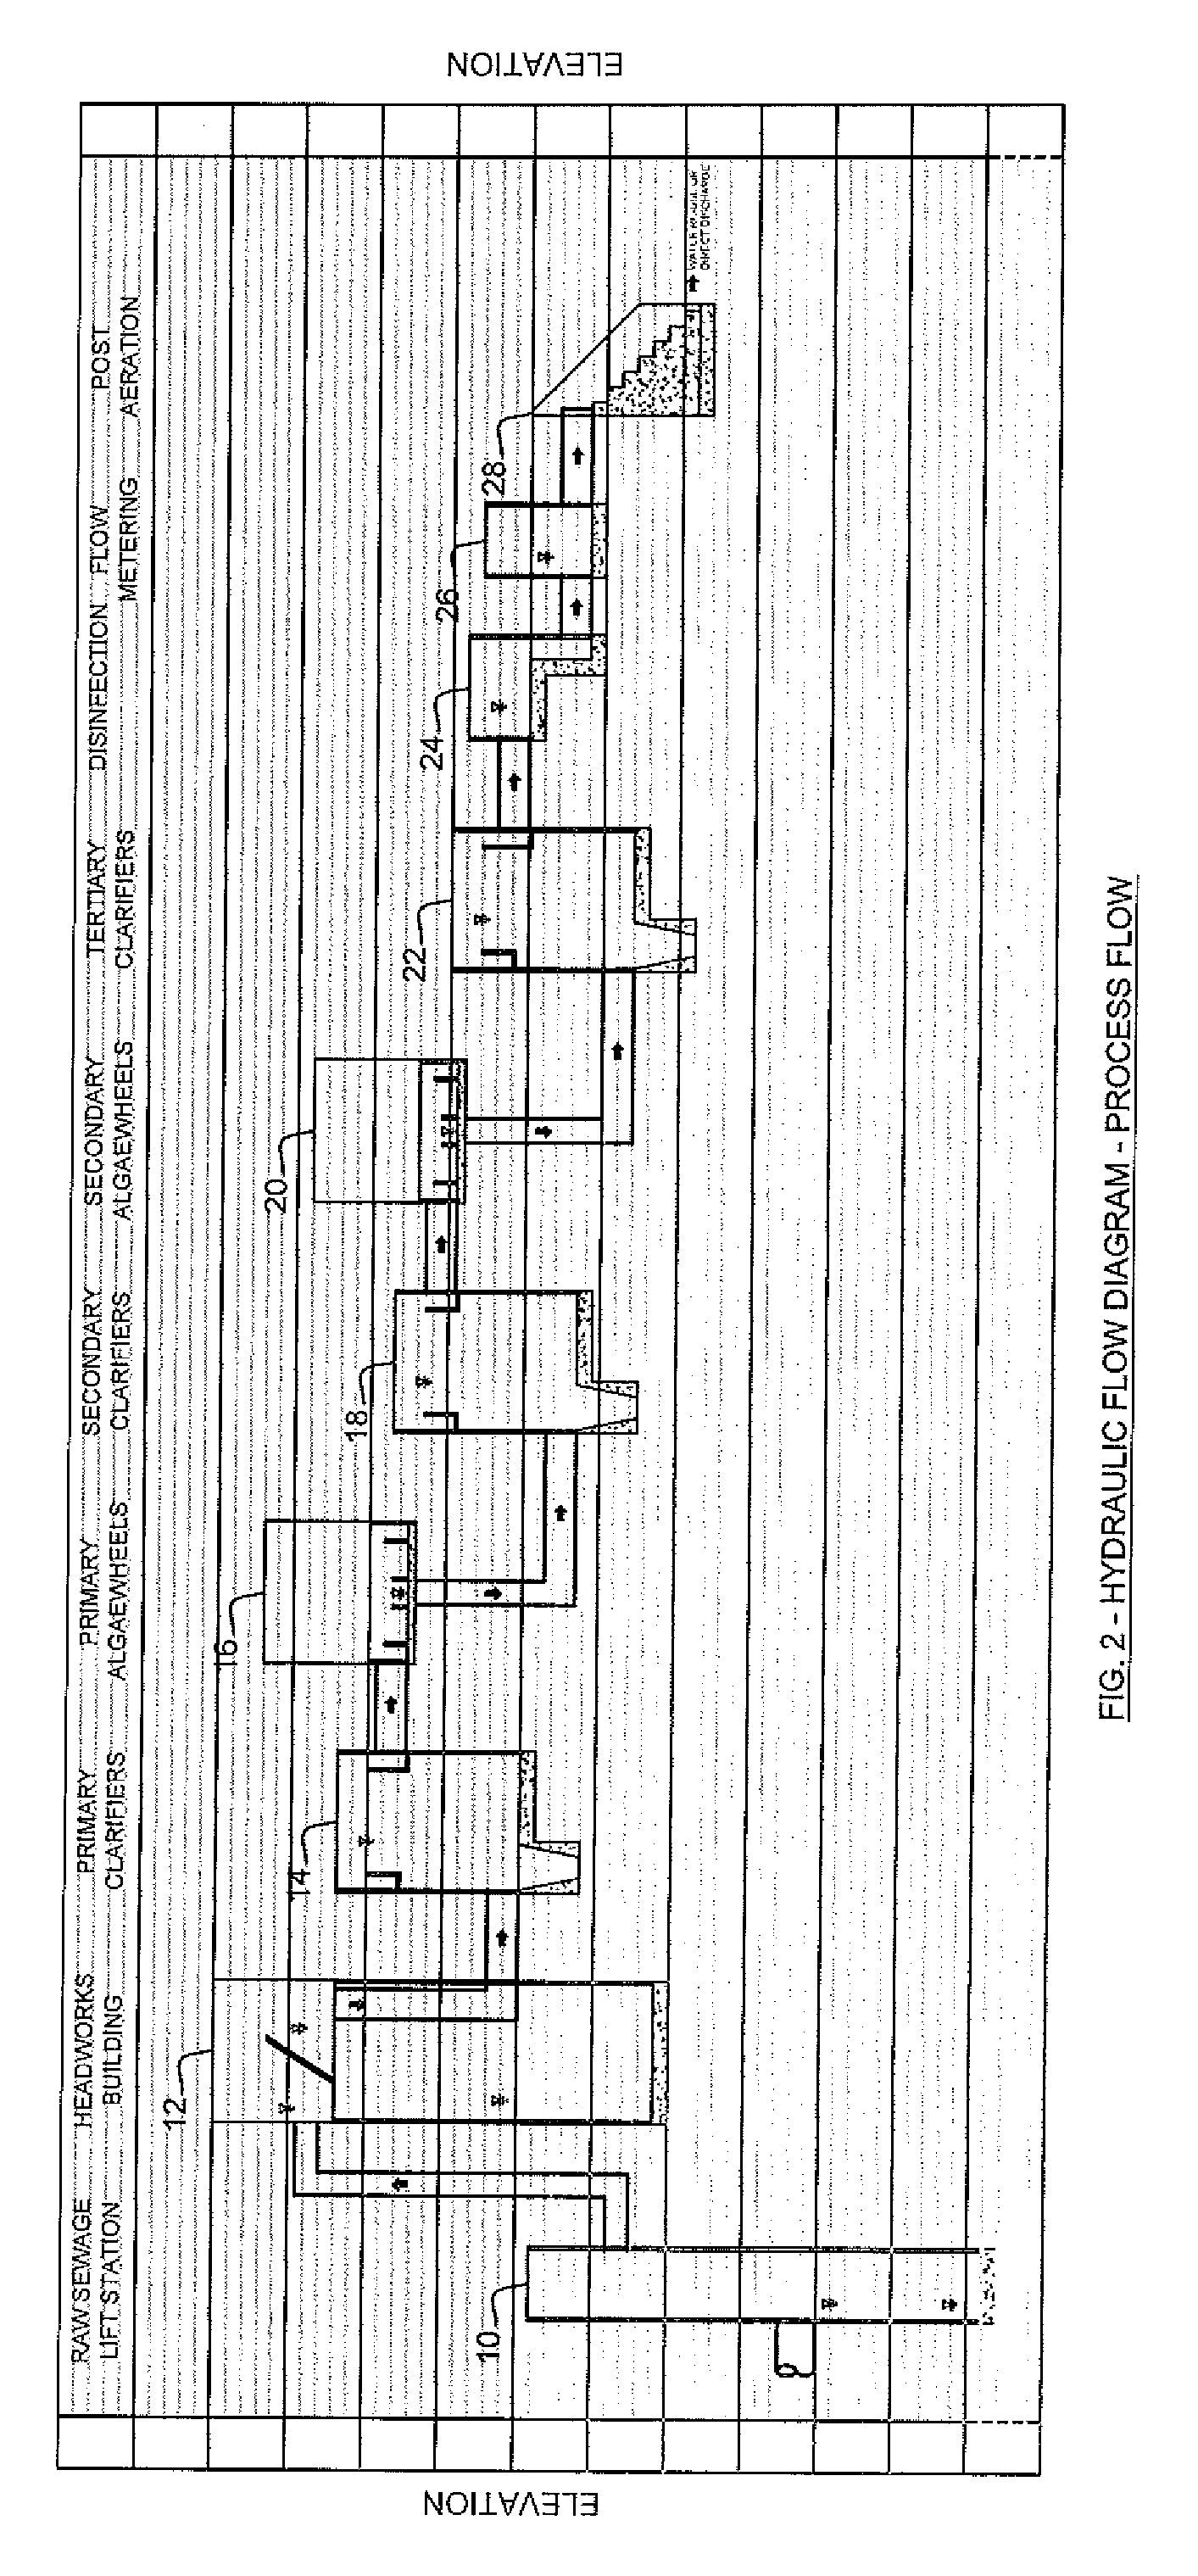 Apparatus and Process for Biological Wastewater Treatment